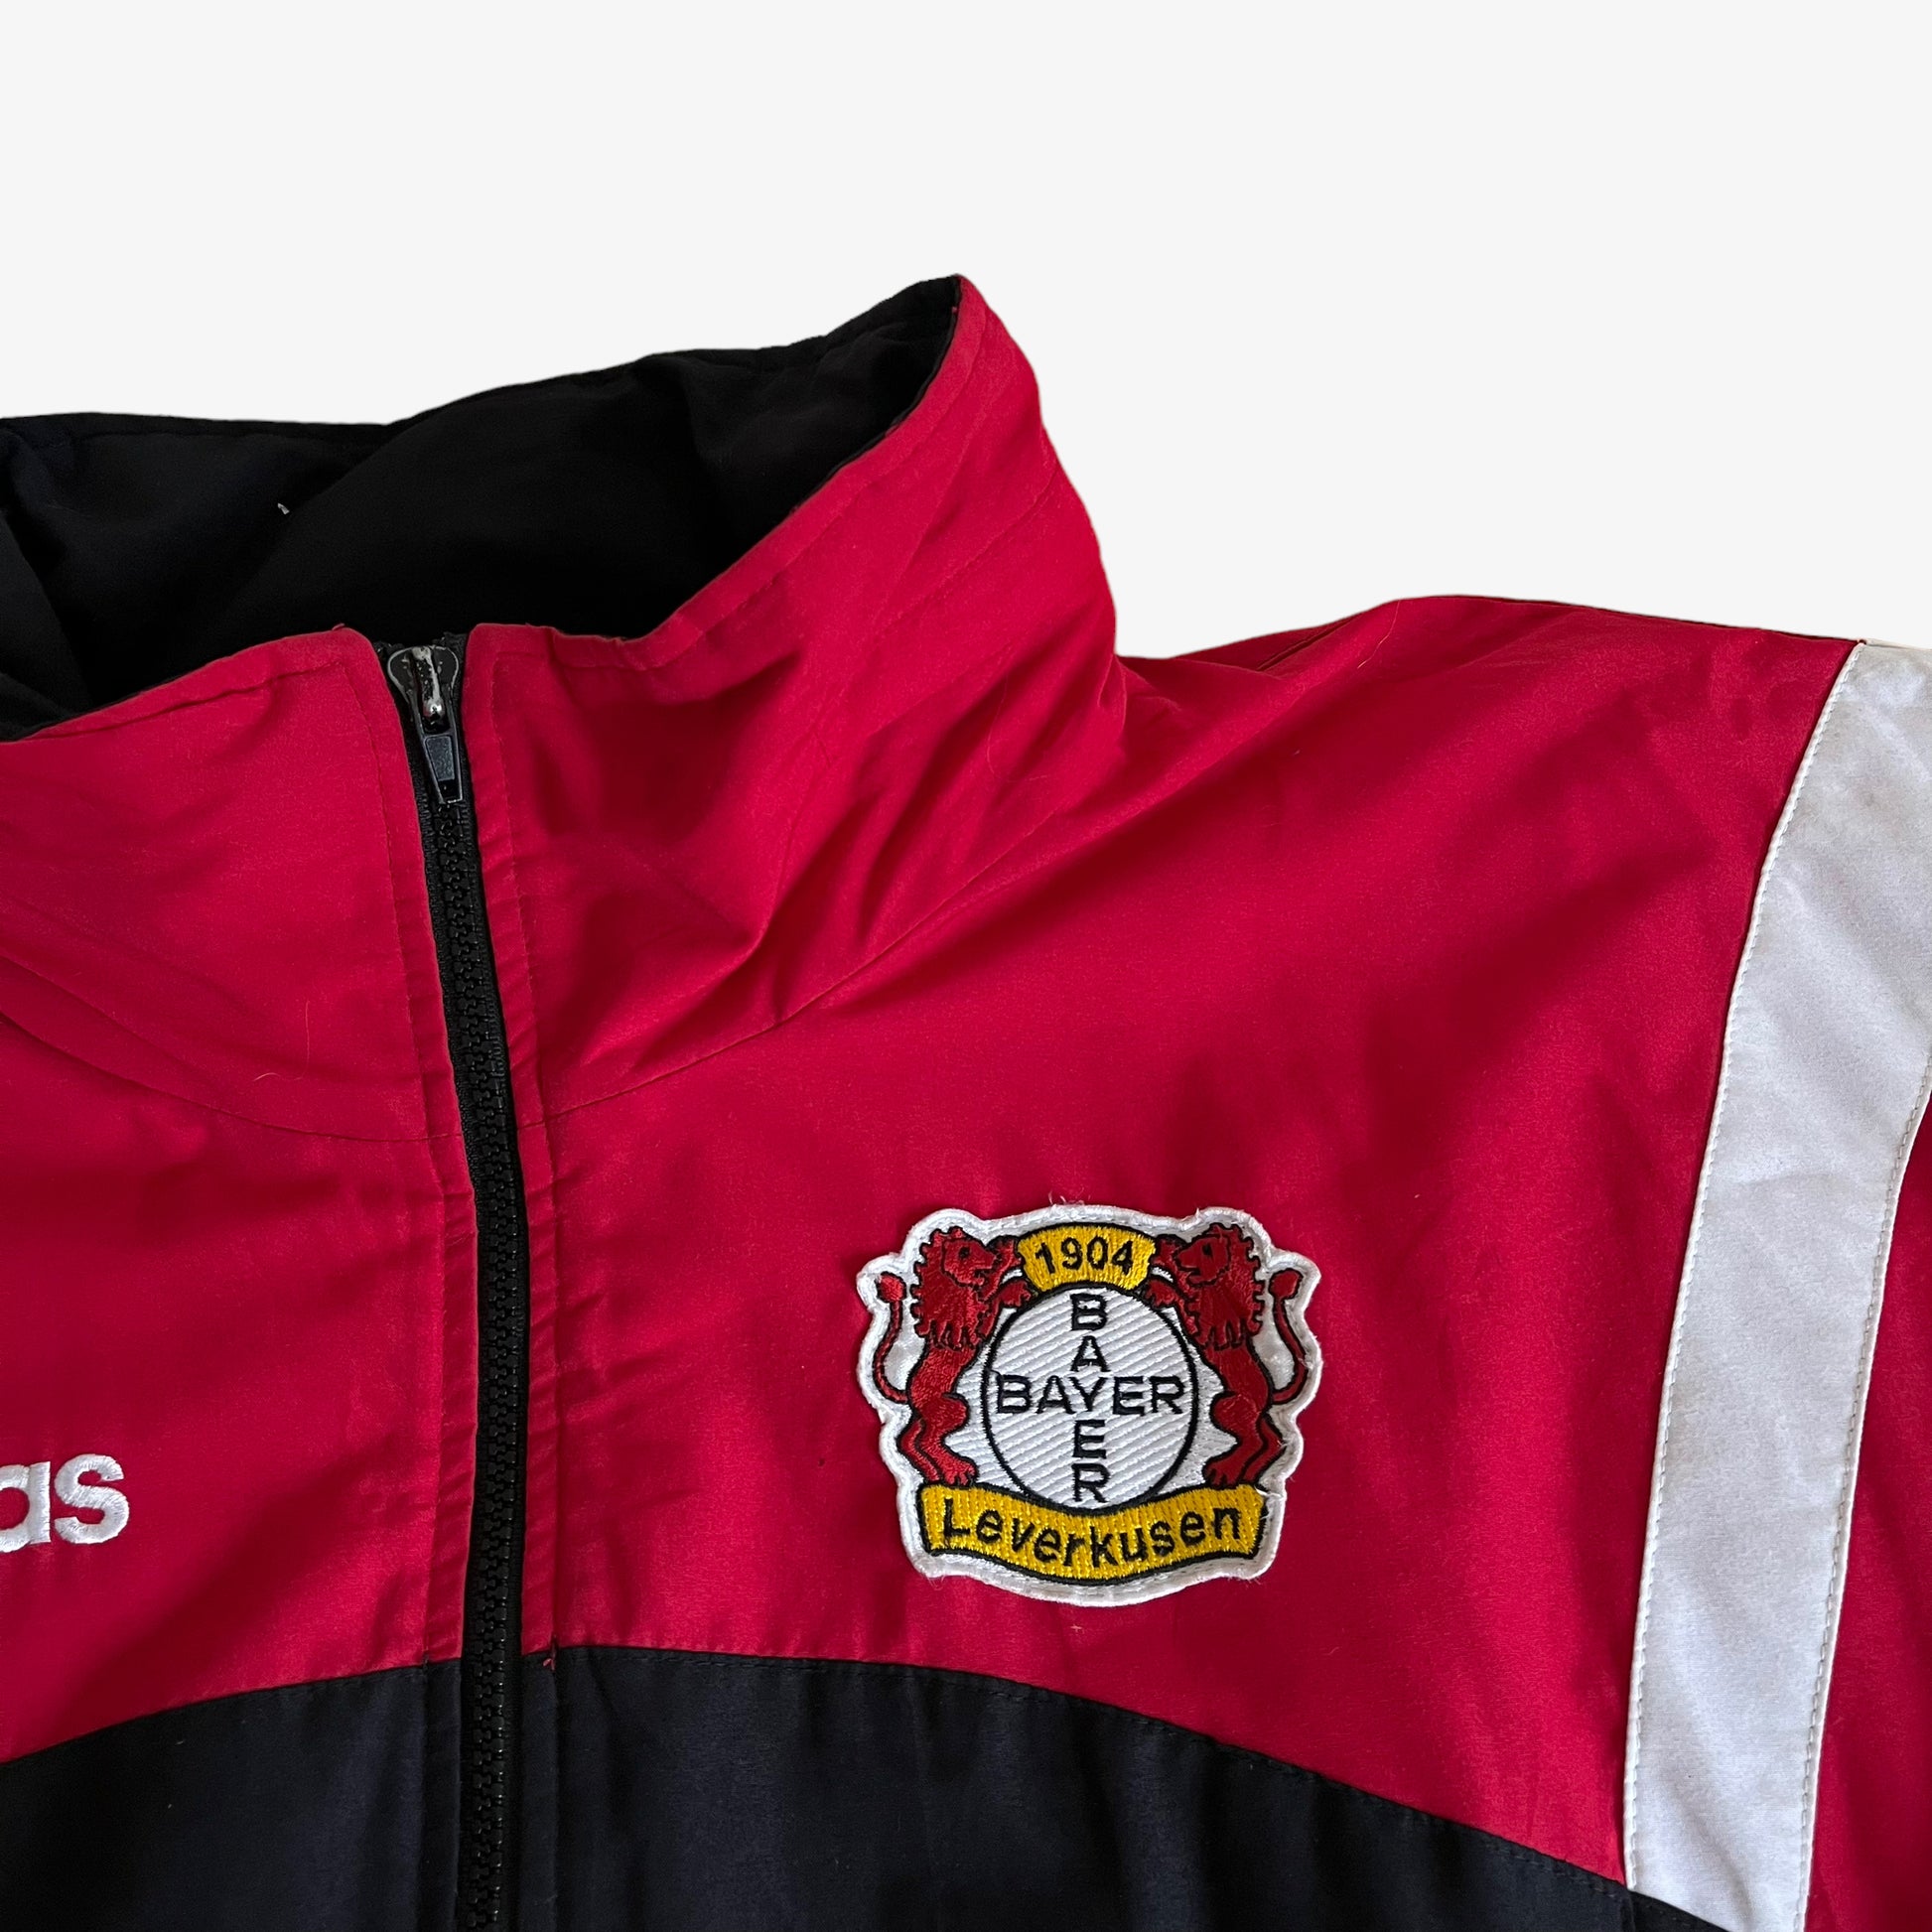 1993-94 QPR Clubhouse Track Jacket - 9/10 - (L)